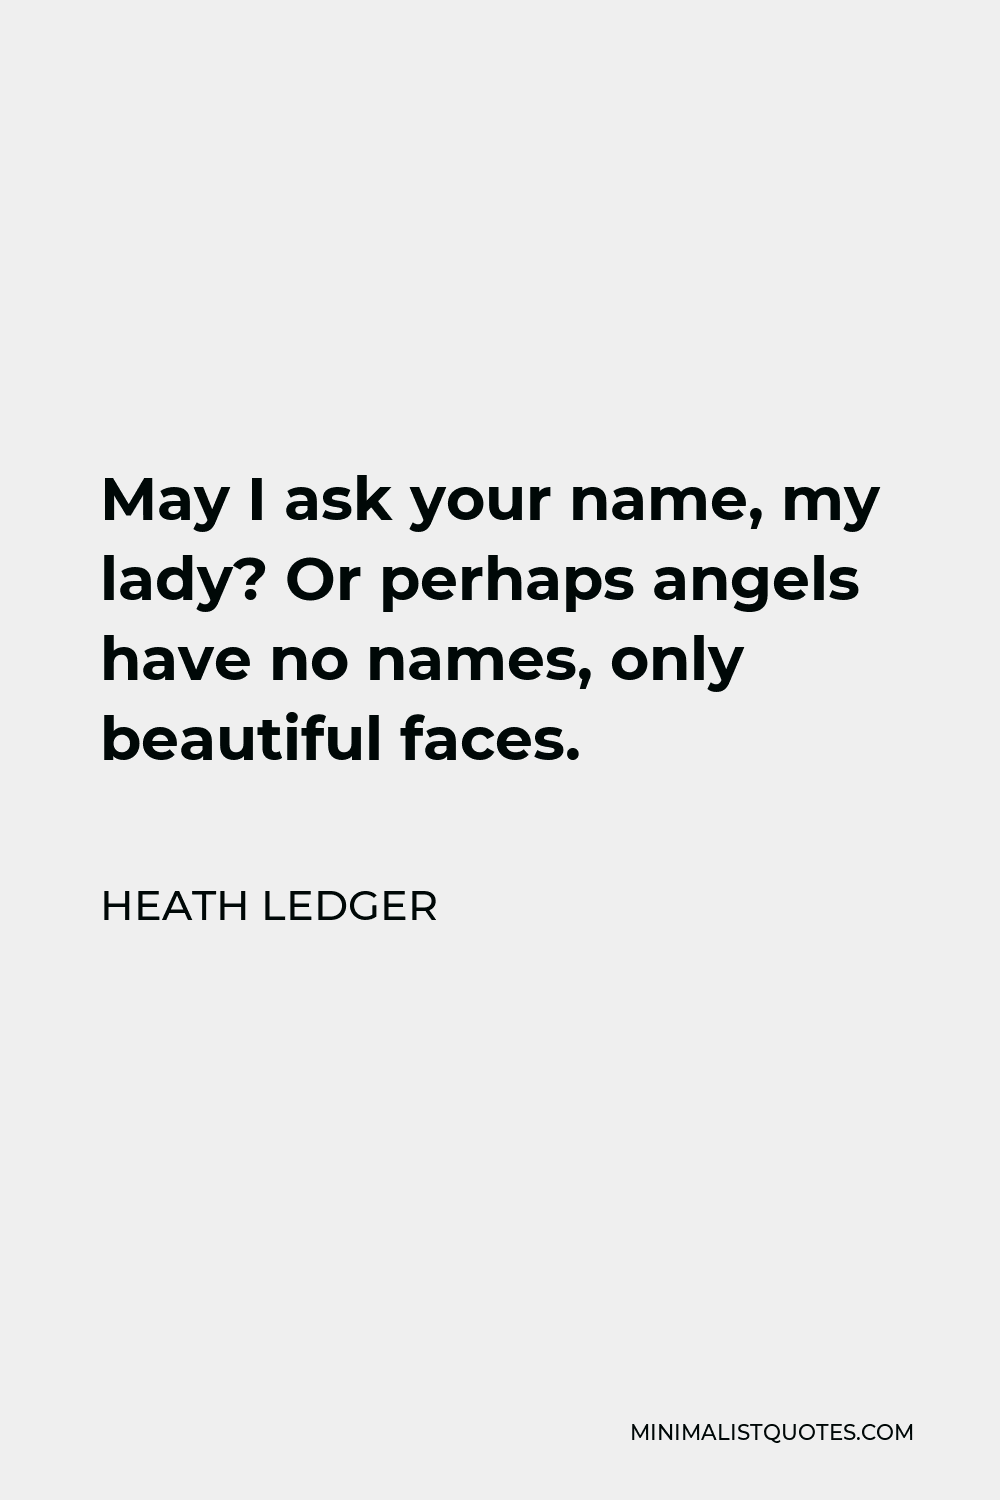 Heath Ledger Quote - May I ask your name, my lady? Or perhaps angels have no names, only beautiful faces.